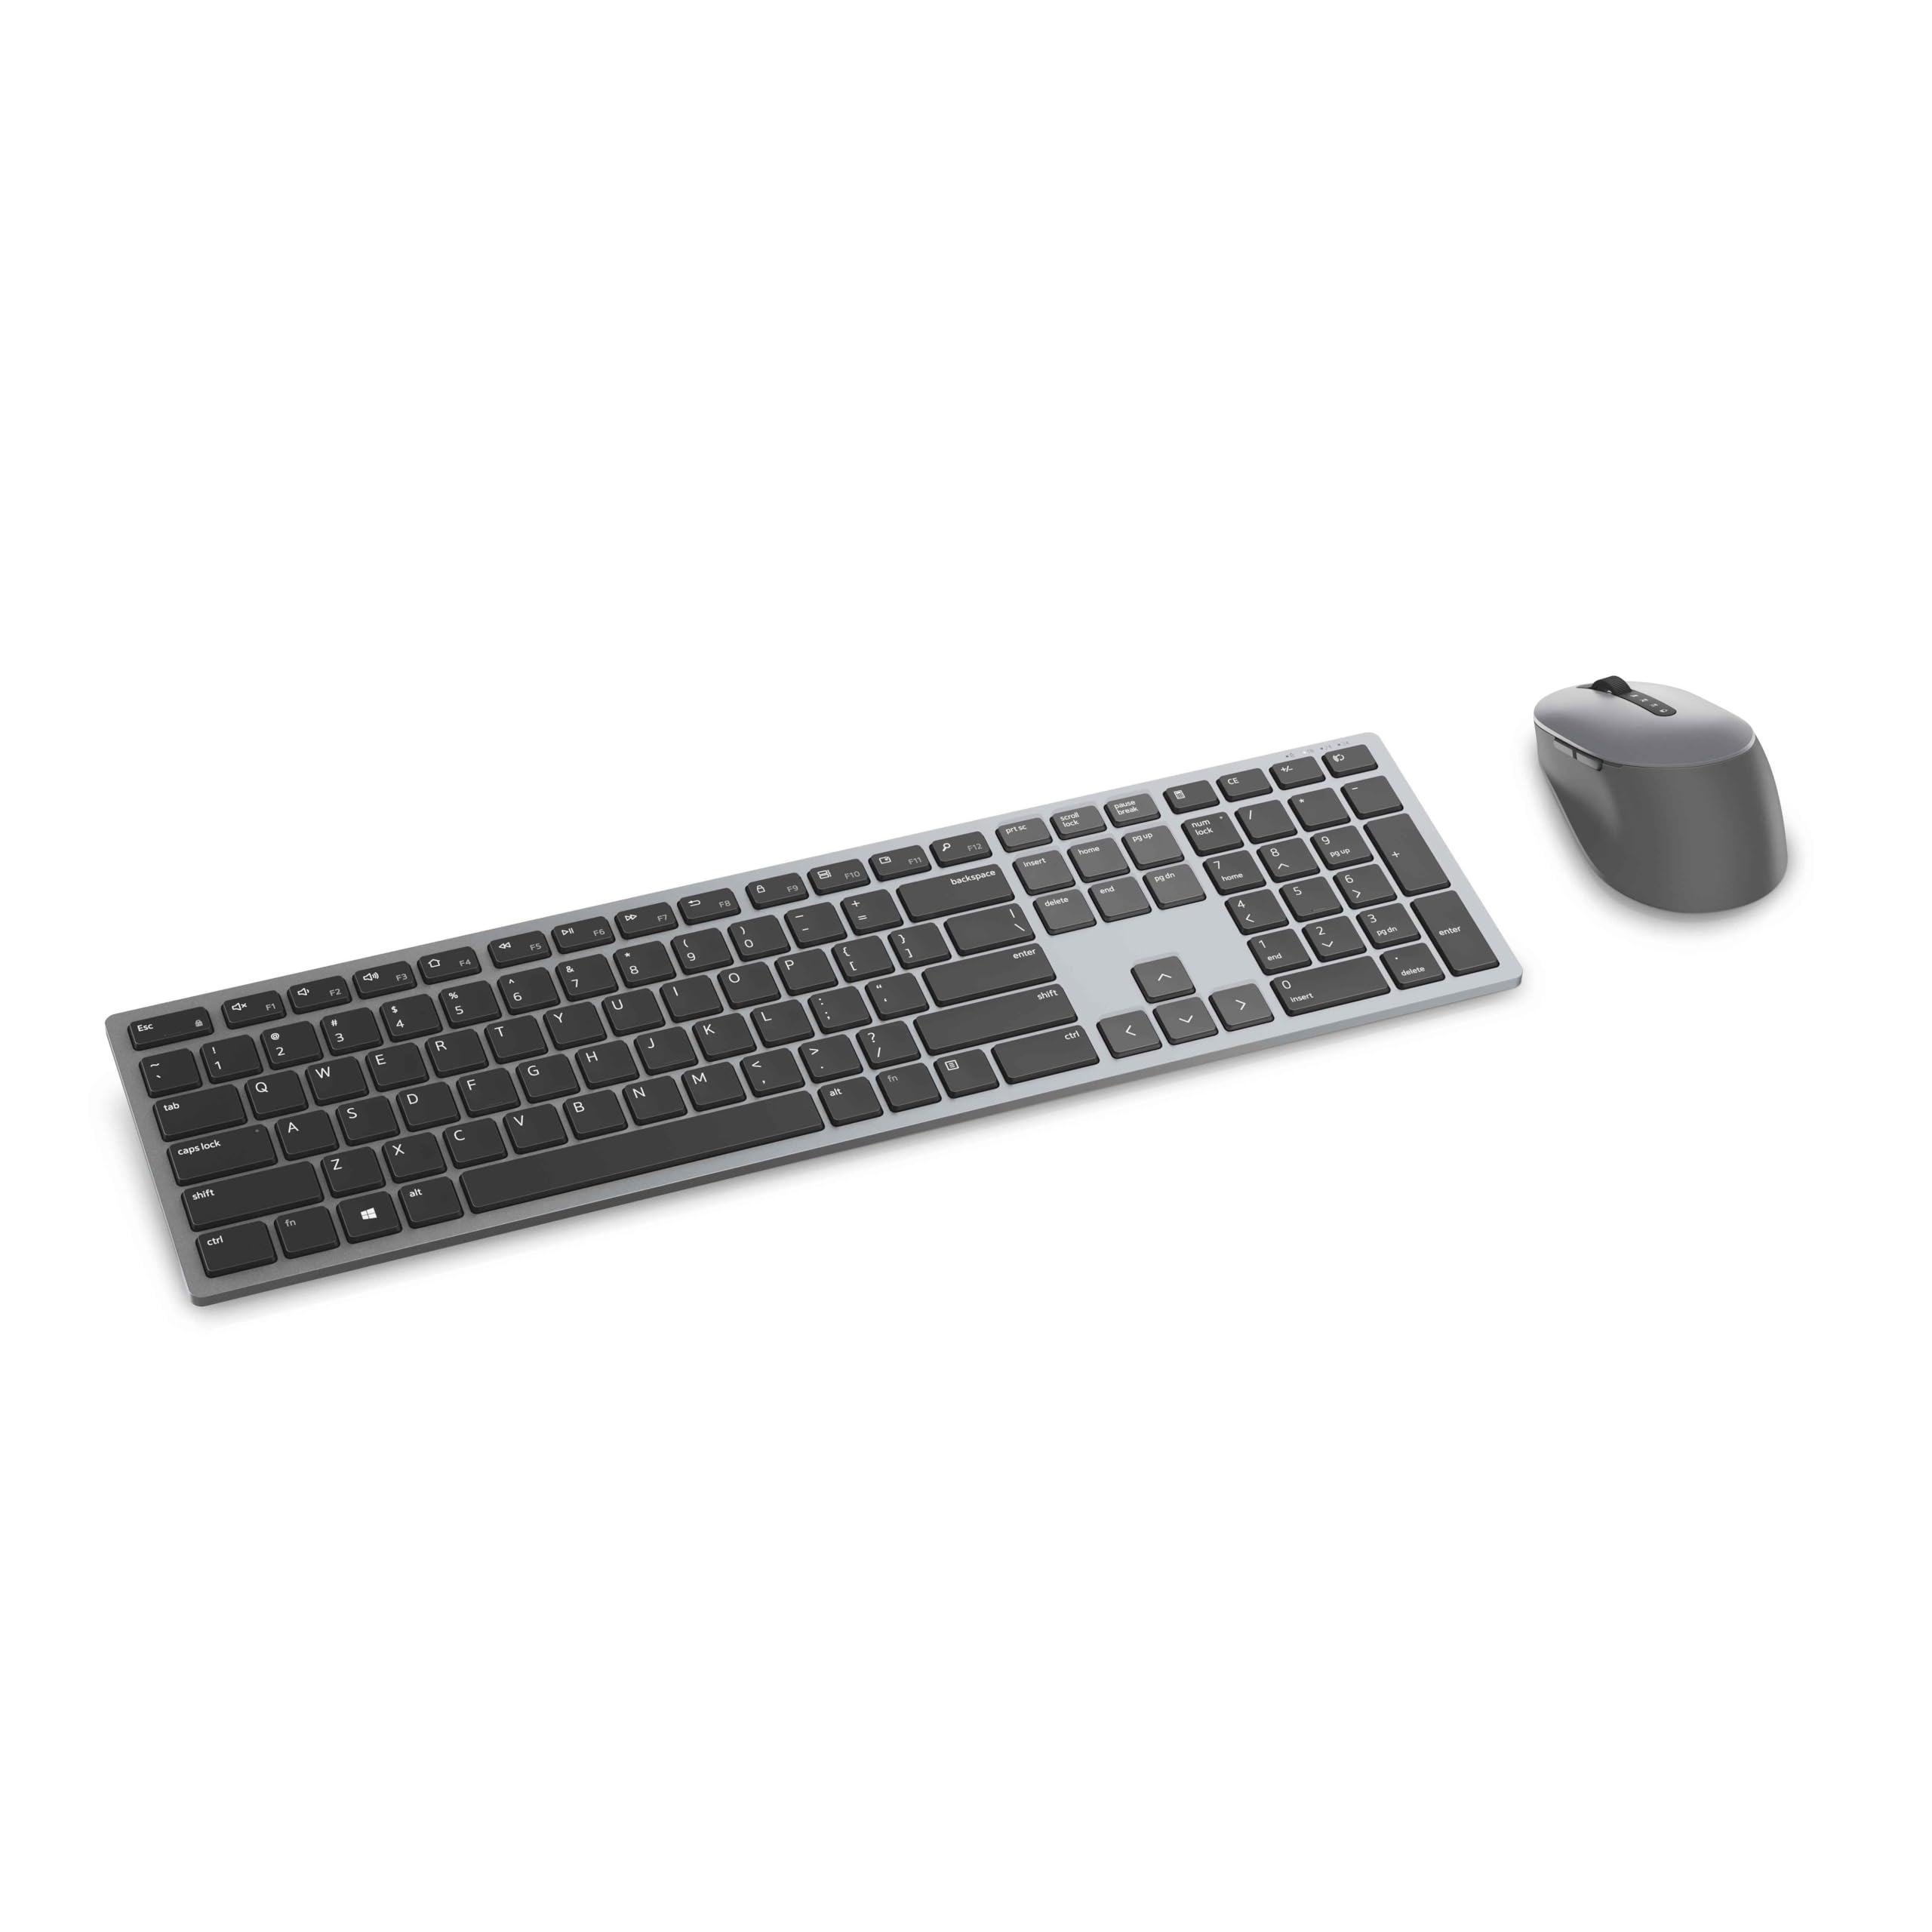 Dell KM7321W Premier Multi-Device Wireless Keyboard and Mouse, UK (QWERTY), 2.4GHz, Bluetooth 5.0, 128-bit AES Encryption, 4000 dpi, Compatible with Windows, Mac, Linux, Chrome and Android, (Grey)